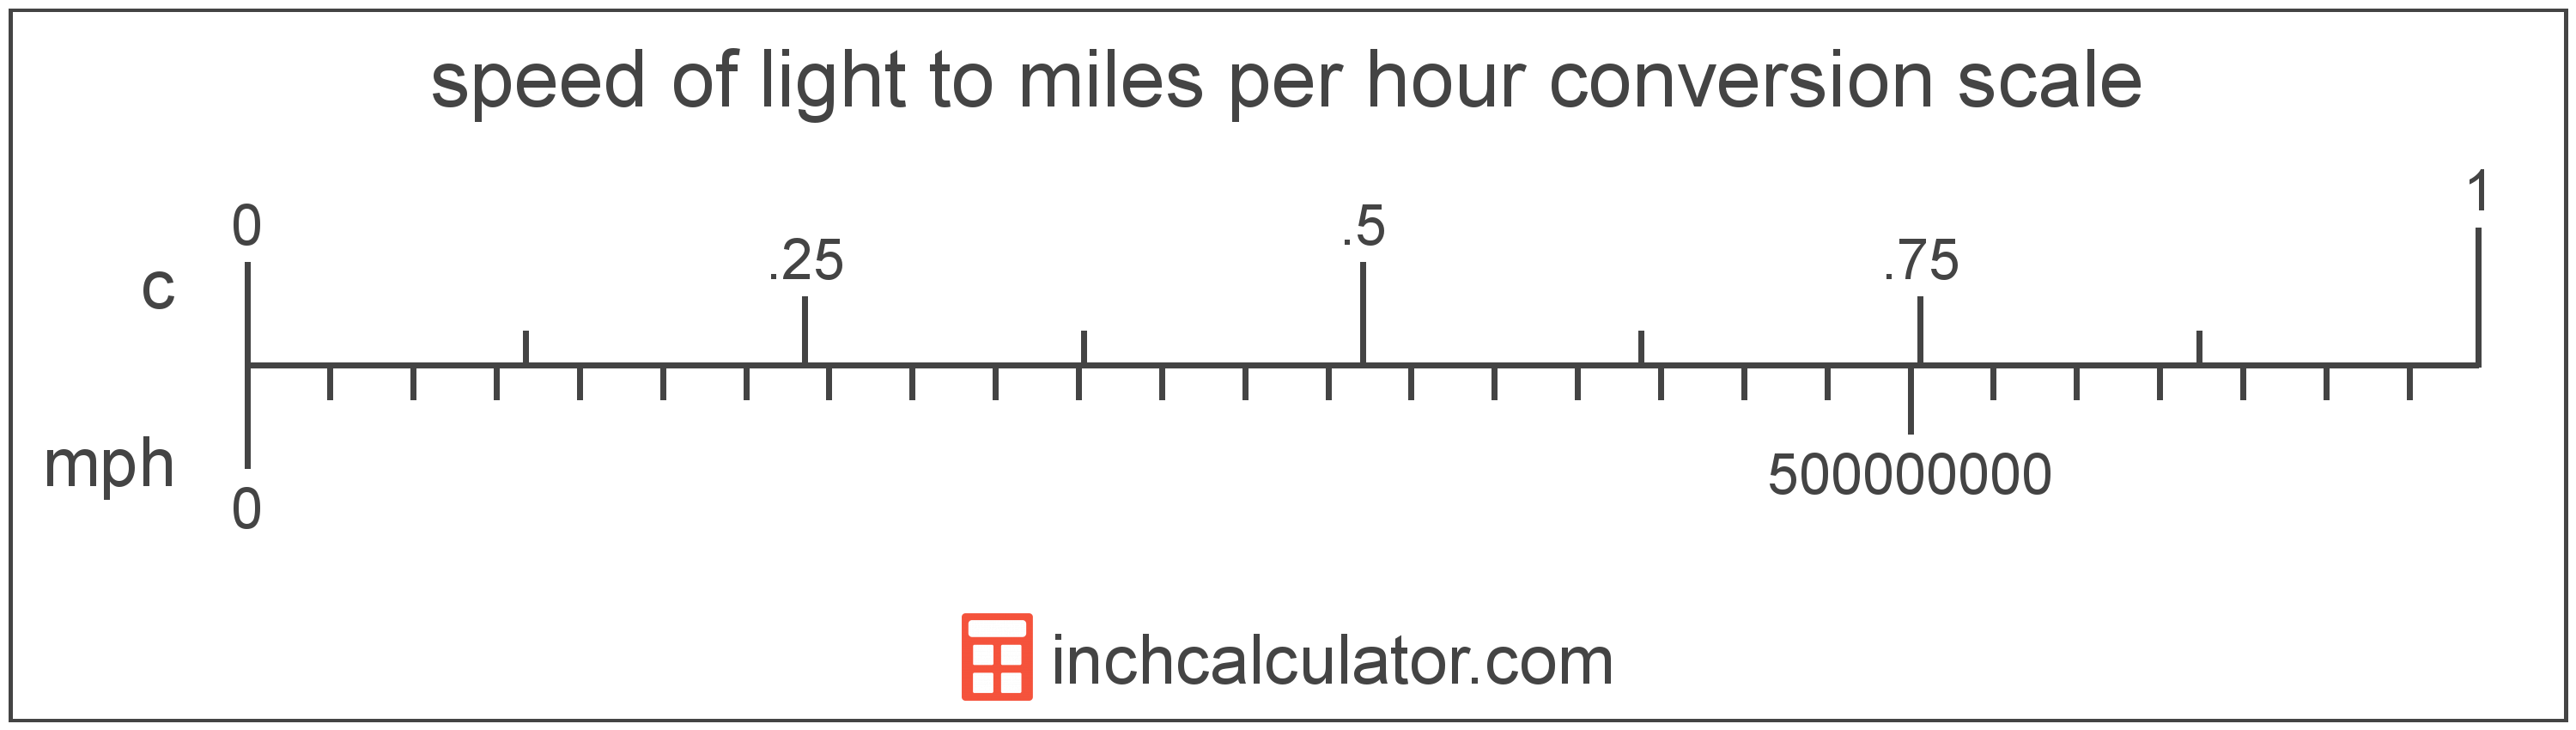 conversion scale showing speed of light and equivalent miles per hour speed values